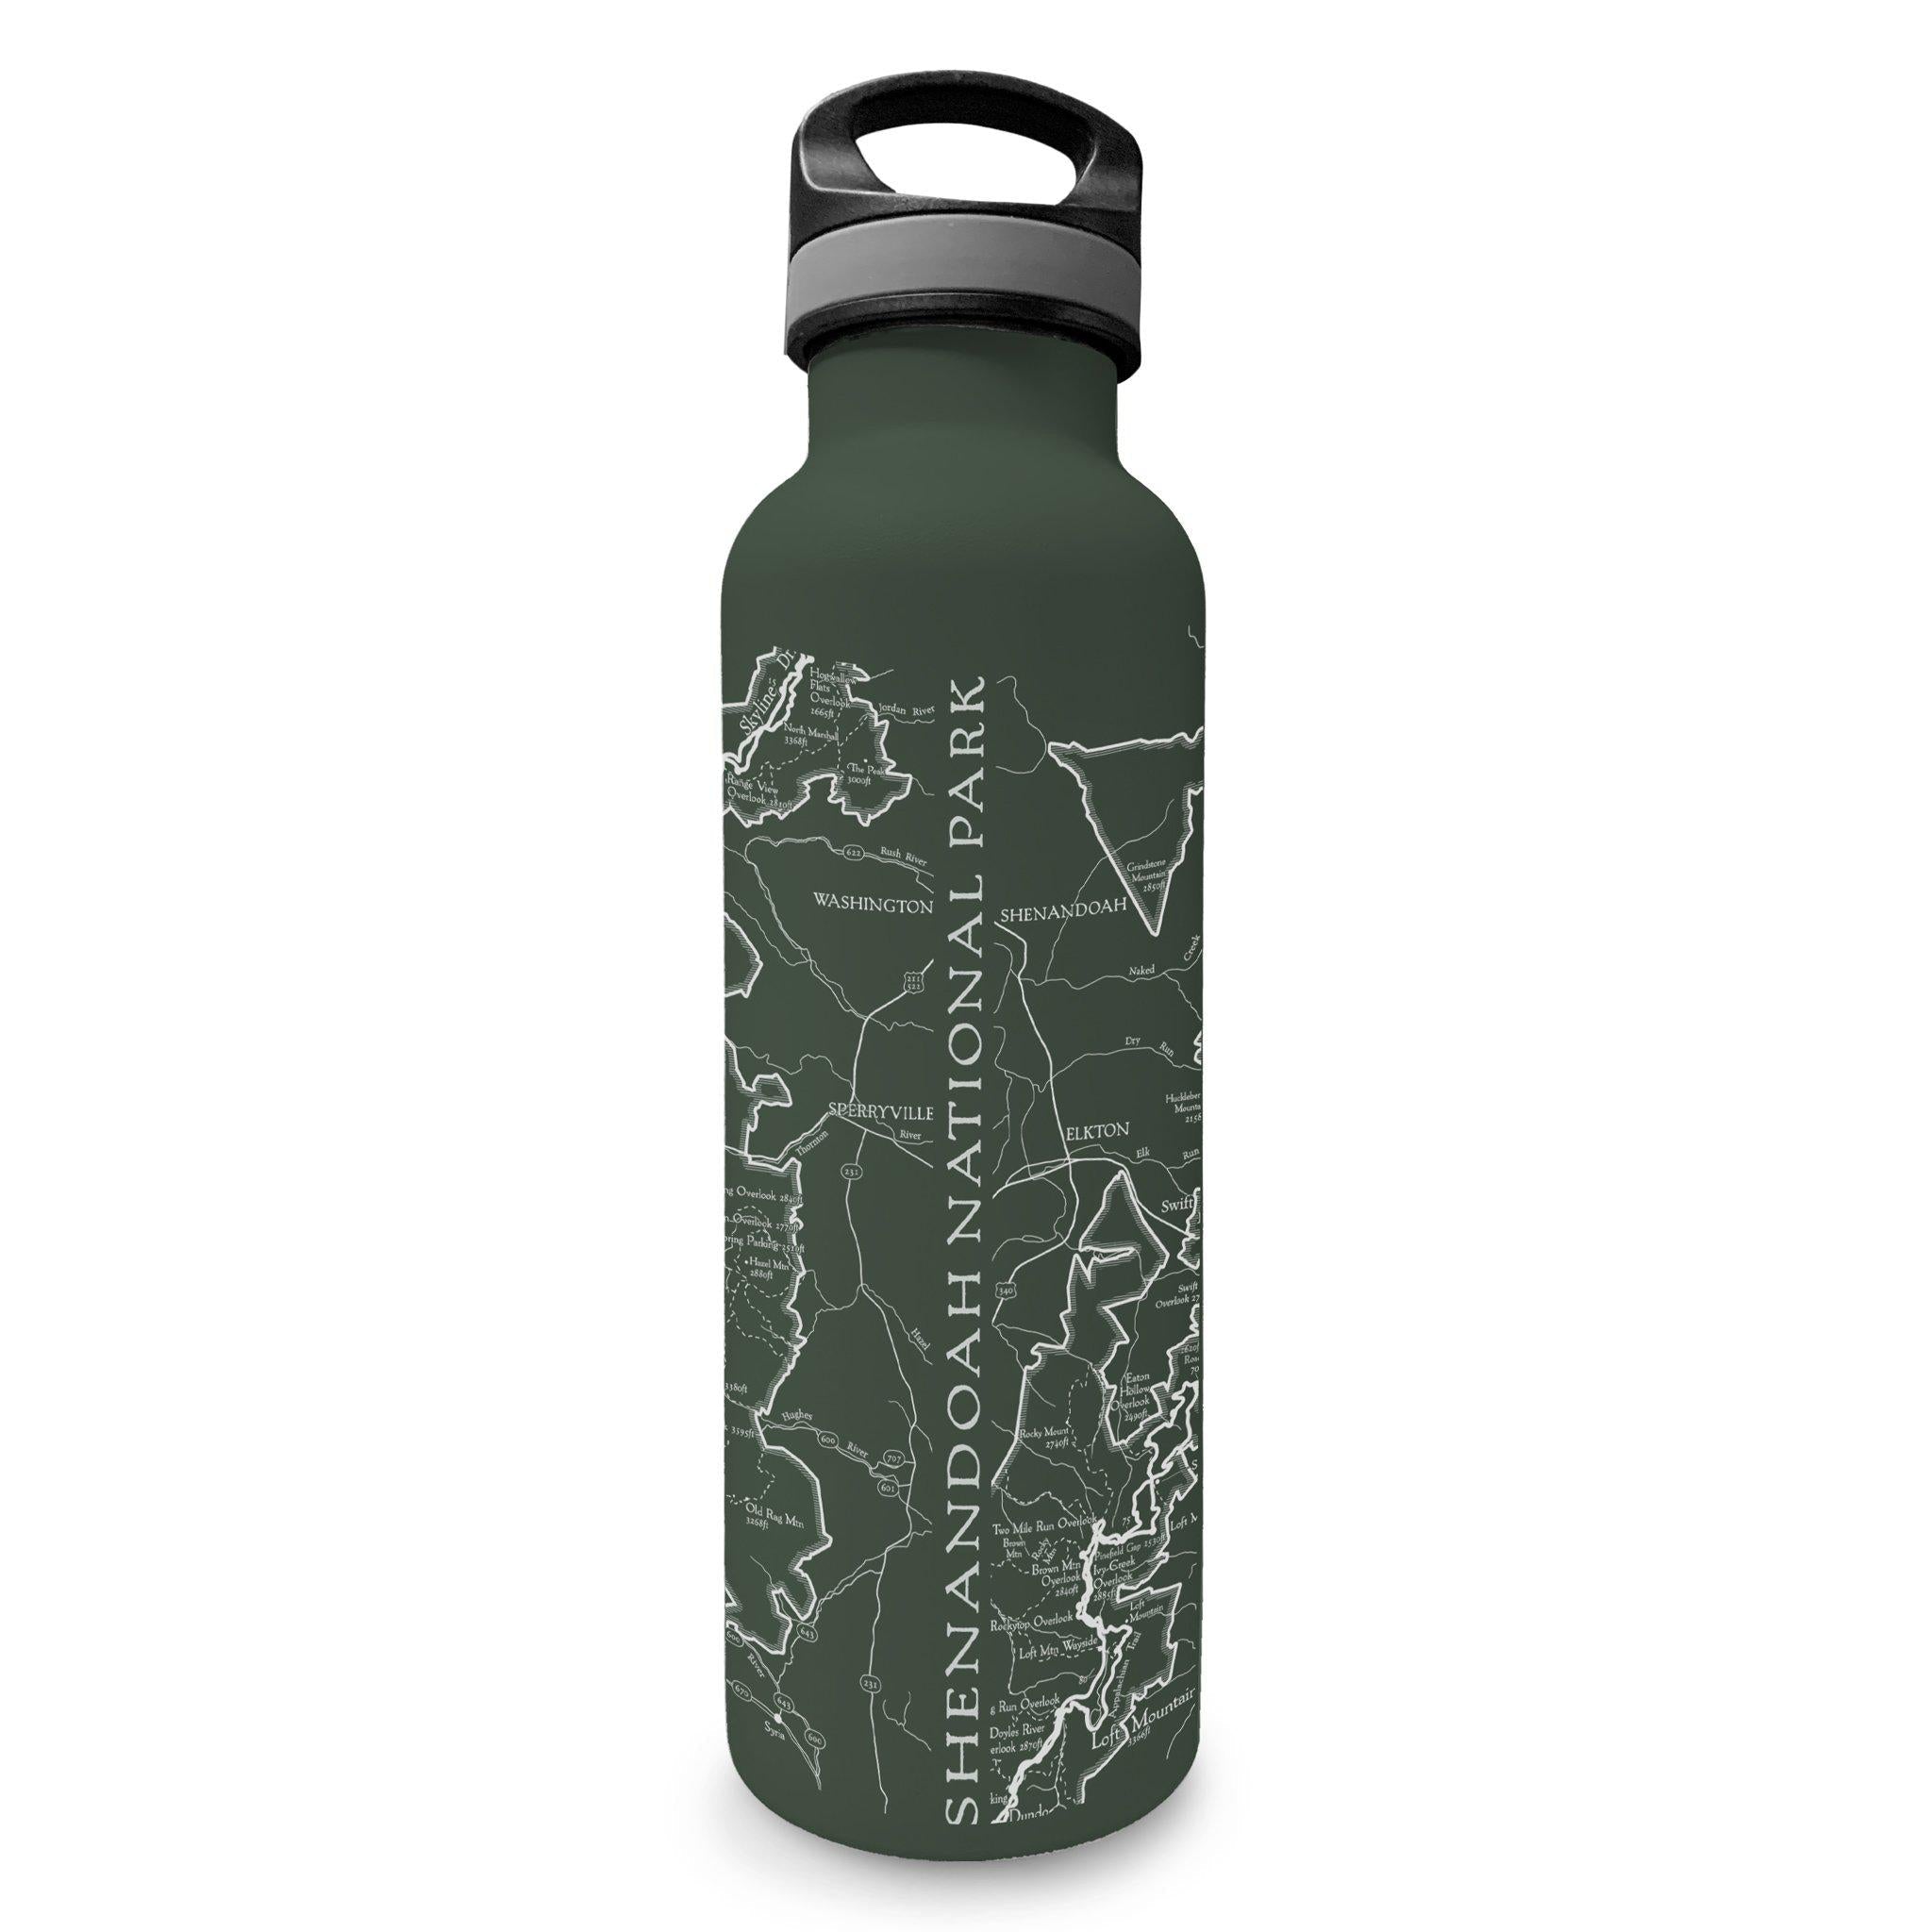 I Love Hiking - Hiking Is IN My Heart - Stainless Steel Water Bottle